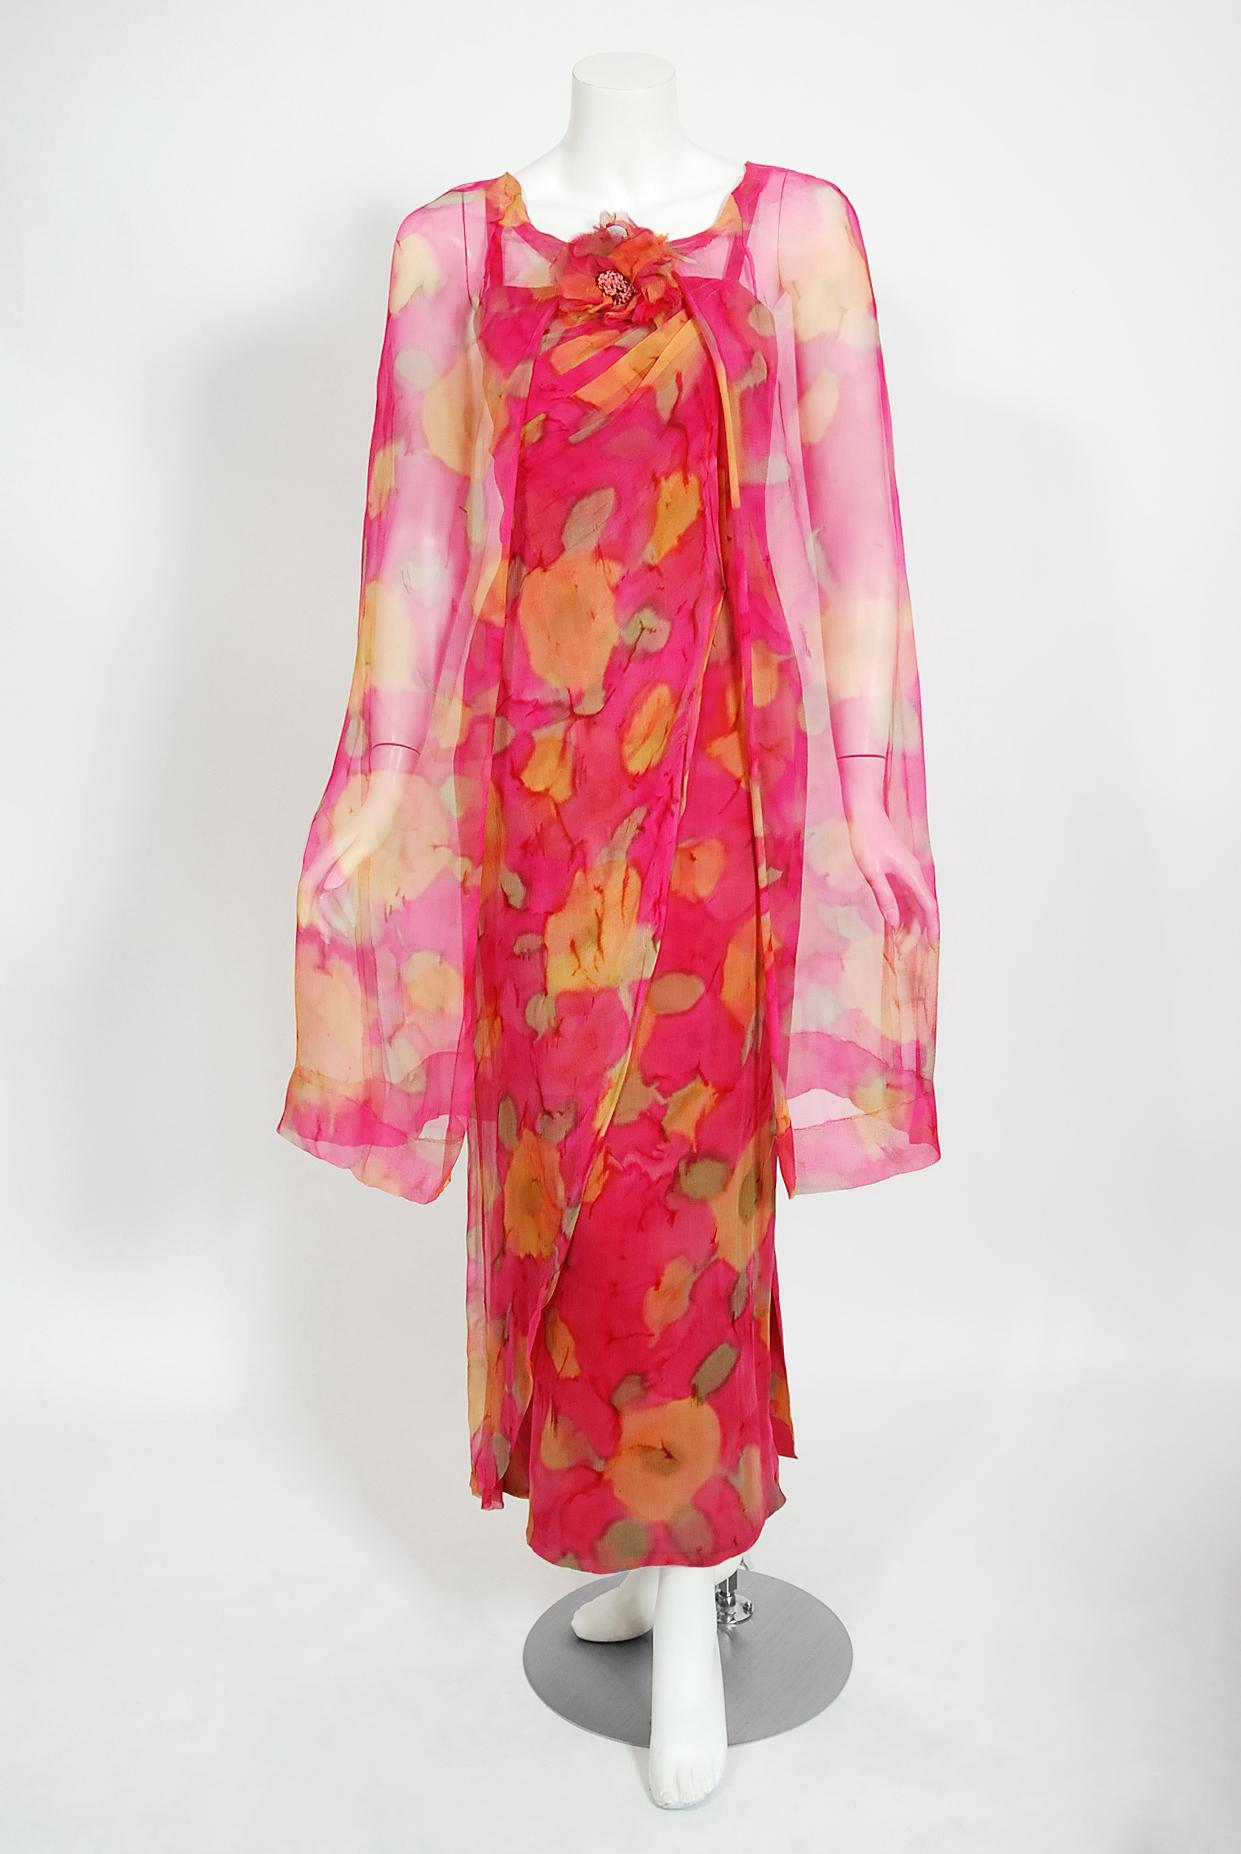 A stunning two-piece dress ensemble by Parisian couturier Jean LeFebure, who operated a small couture house during the 1950's and 1960's. The stunning magenta-pink, marigold and green watercolor floral silk chiffon used for this garment has a fresh